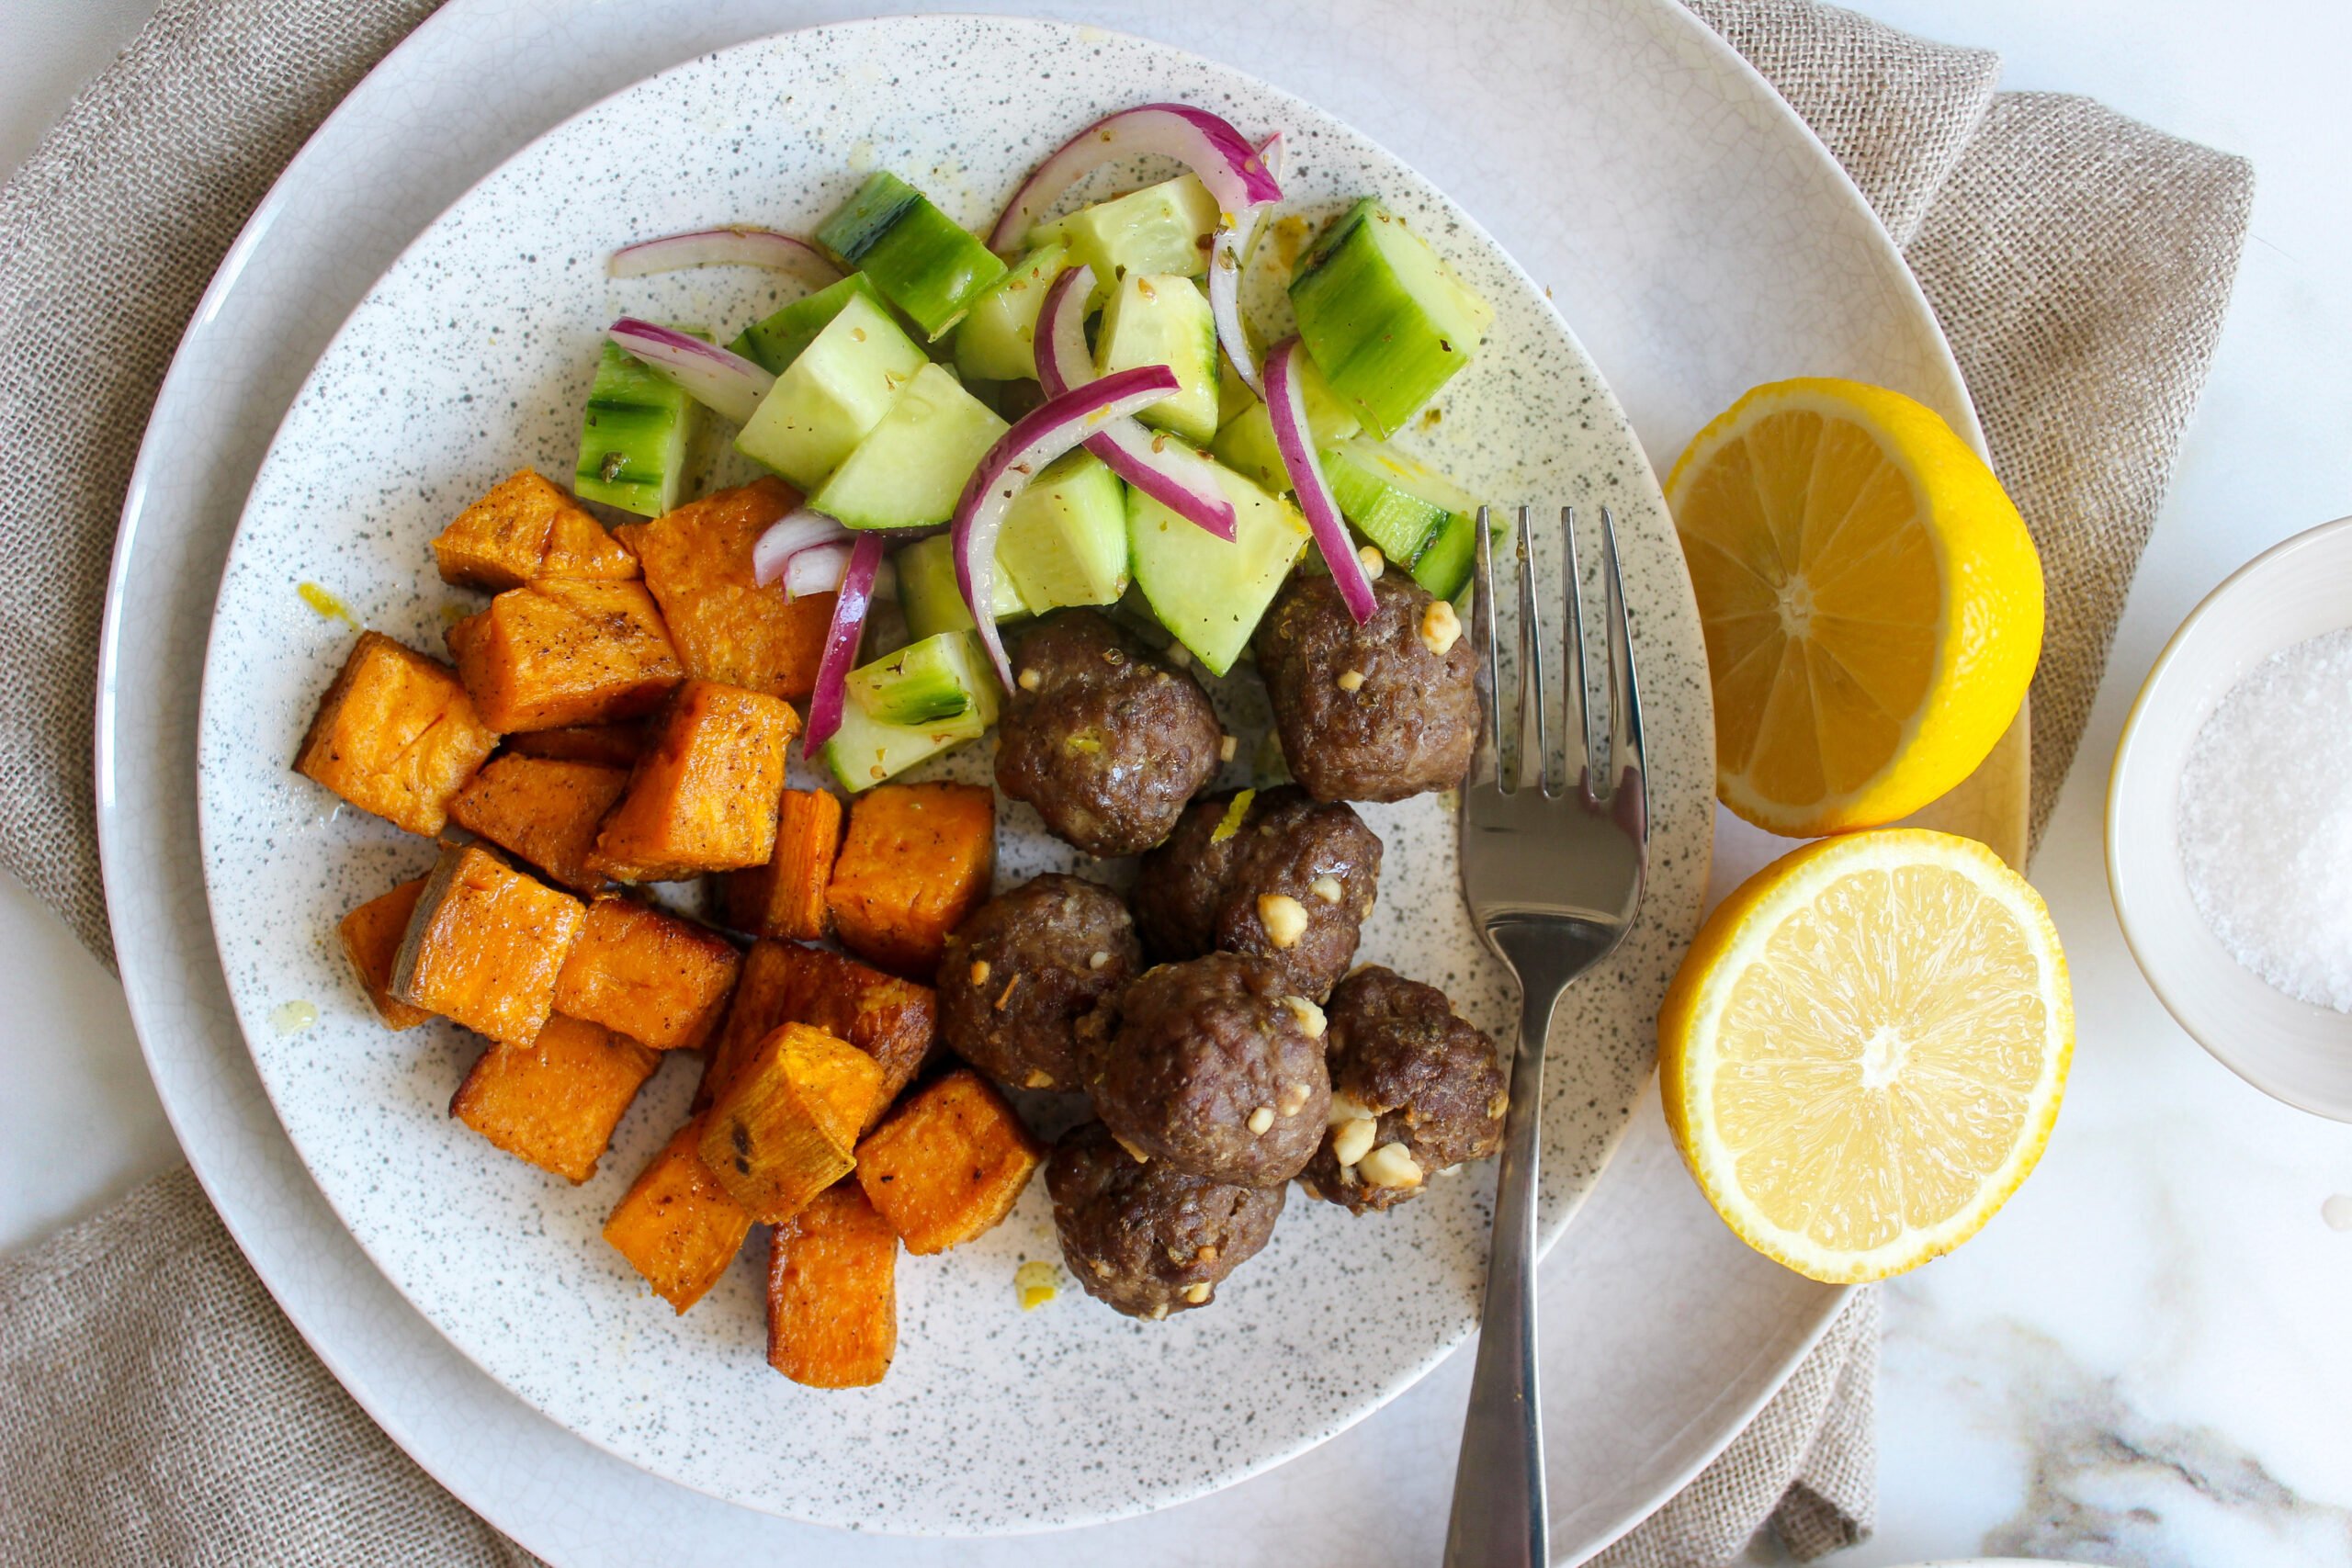 Feta-stuffed meatballs with olive and cucumber salad and roasted sweet potatoes